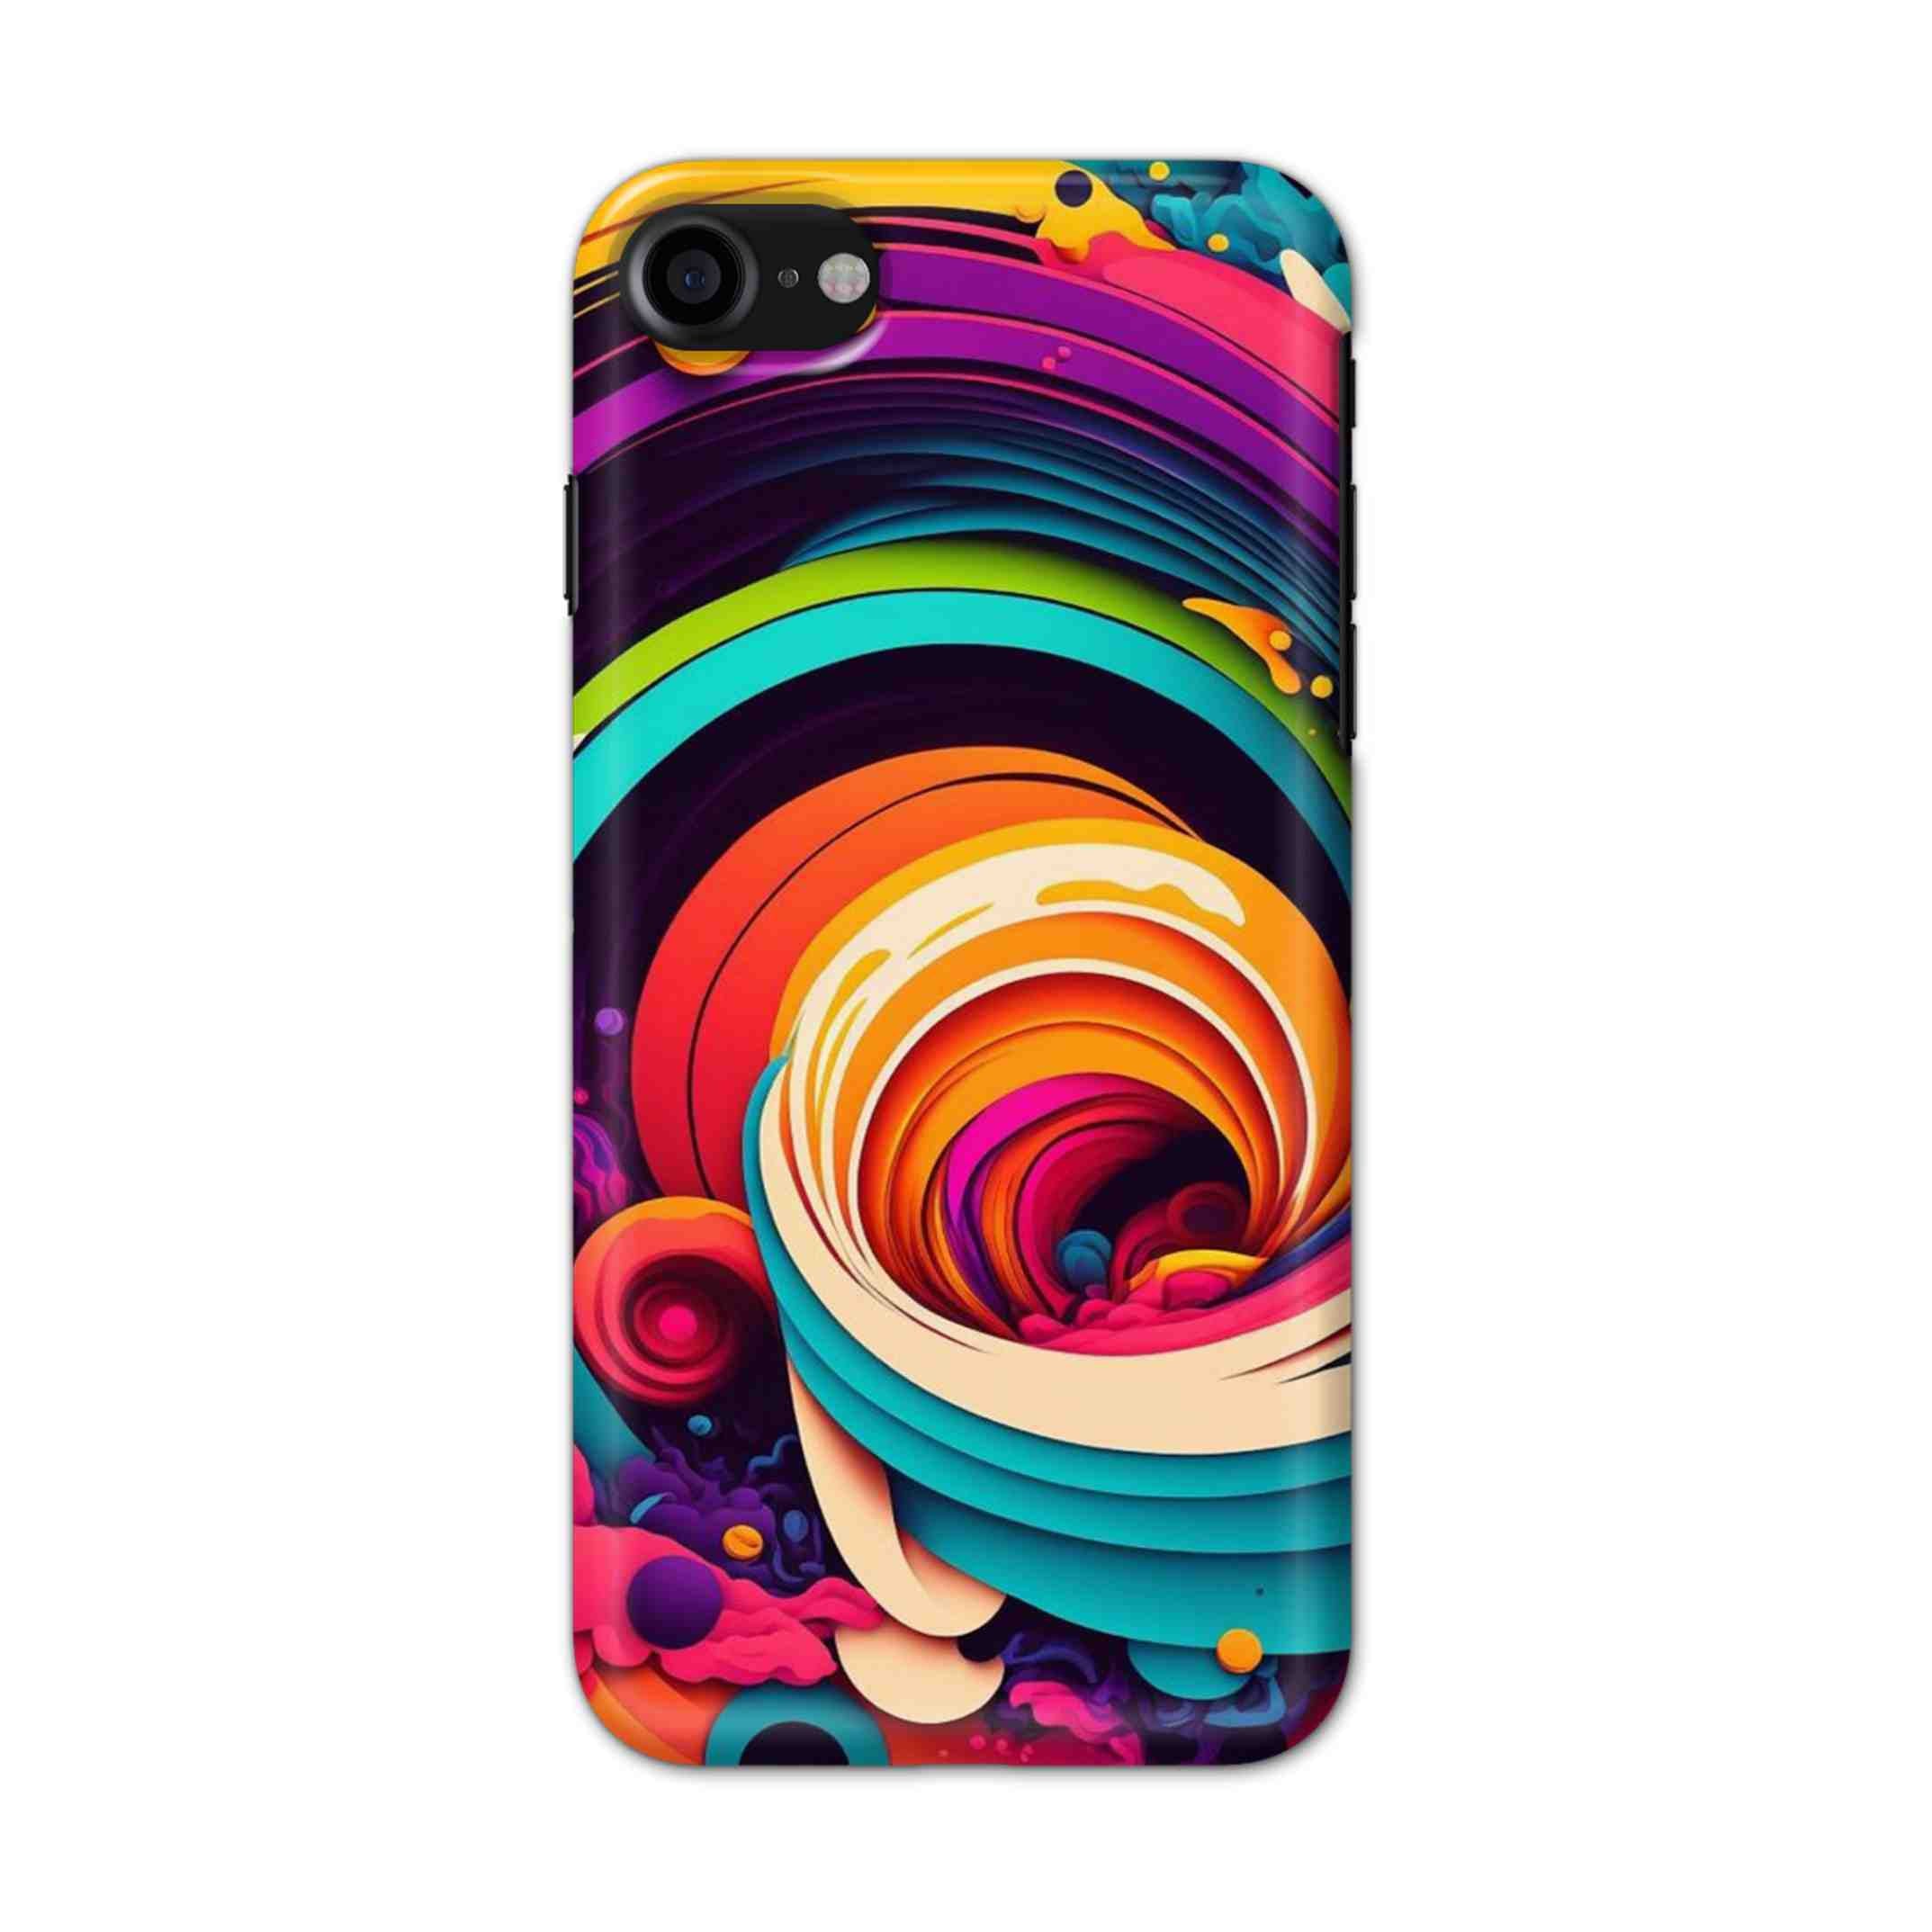 Buy Colour Circle Hard Back Mobile Phone Case/Cover For iPhone 7 / 8 Online